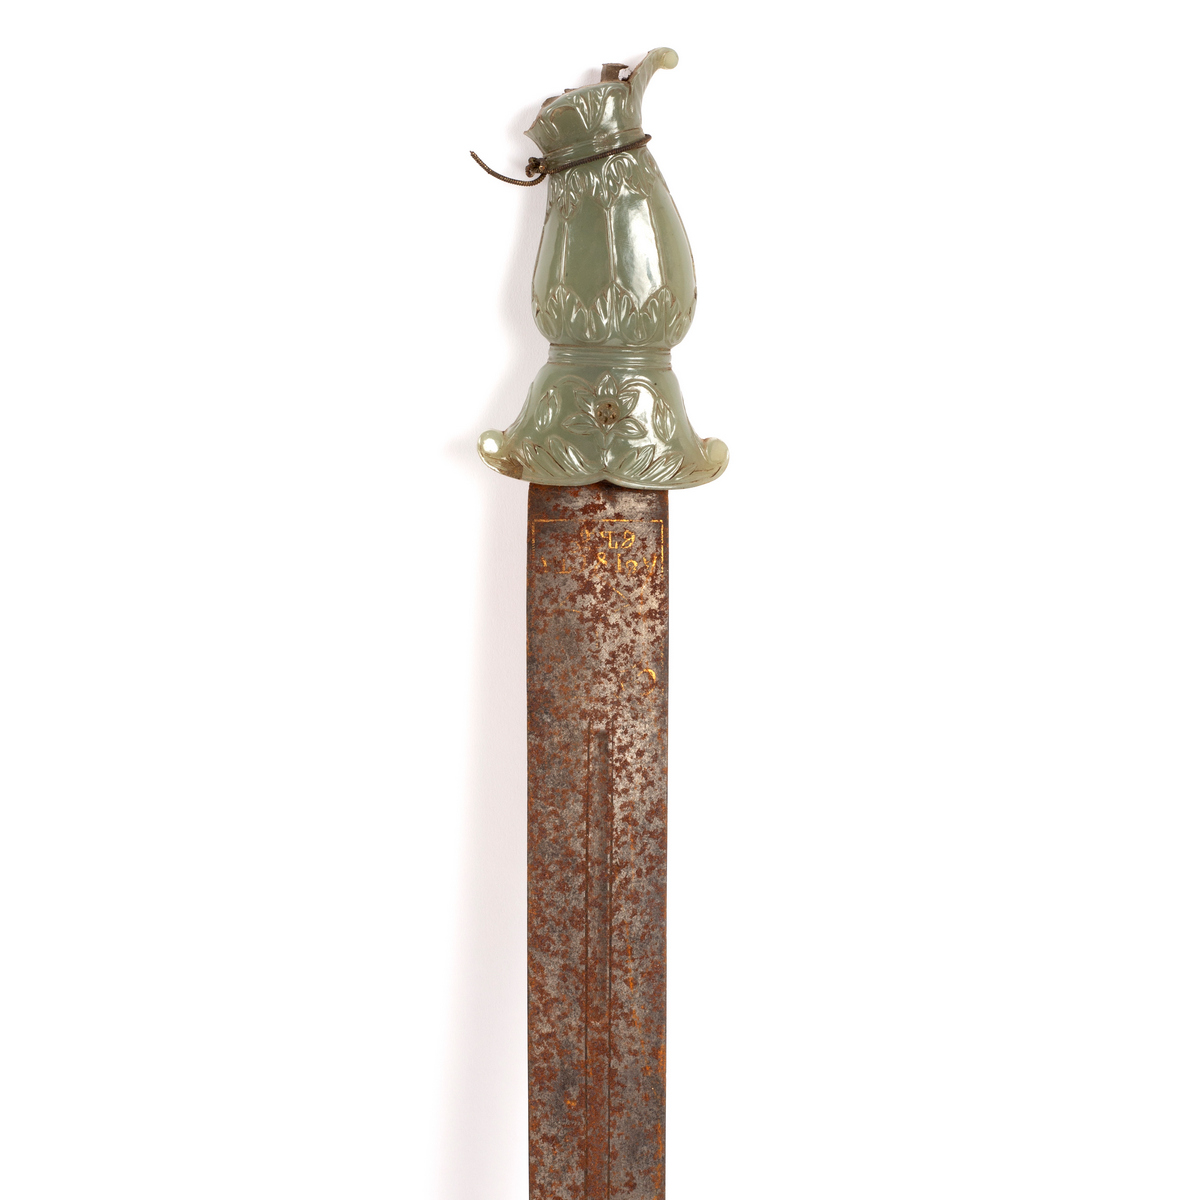 A Mughal sword with jade grip (damaged) and gold inlaid blade, 71. - Image 4 of 4